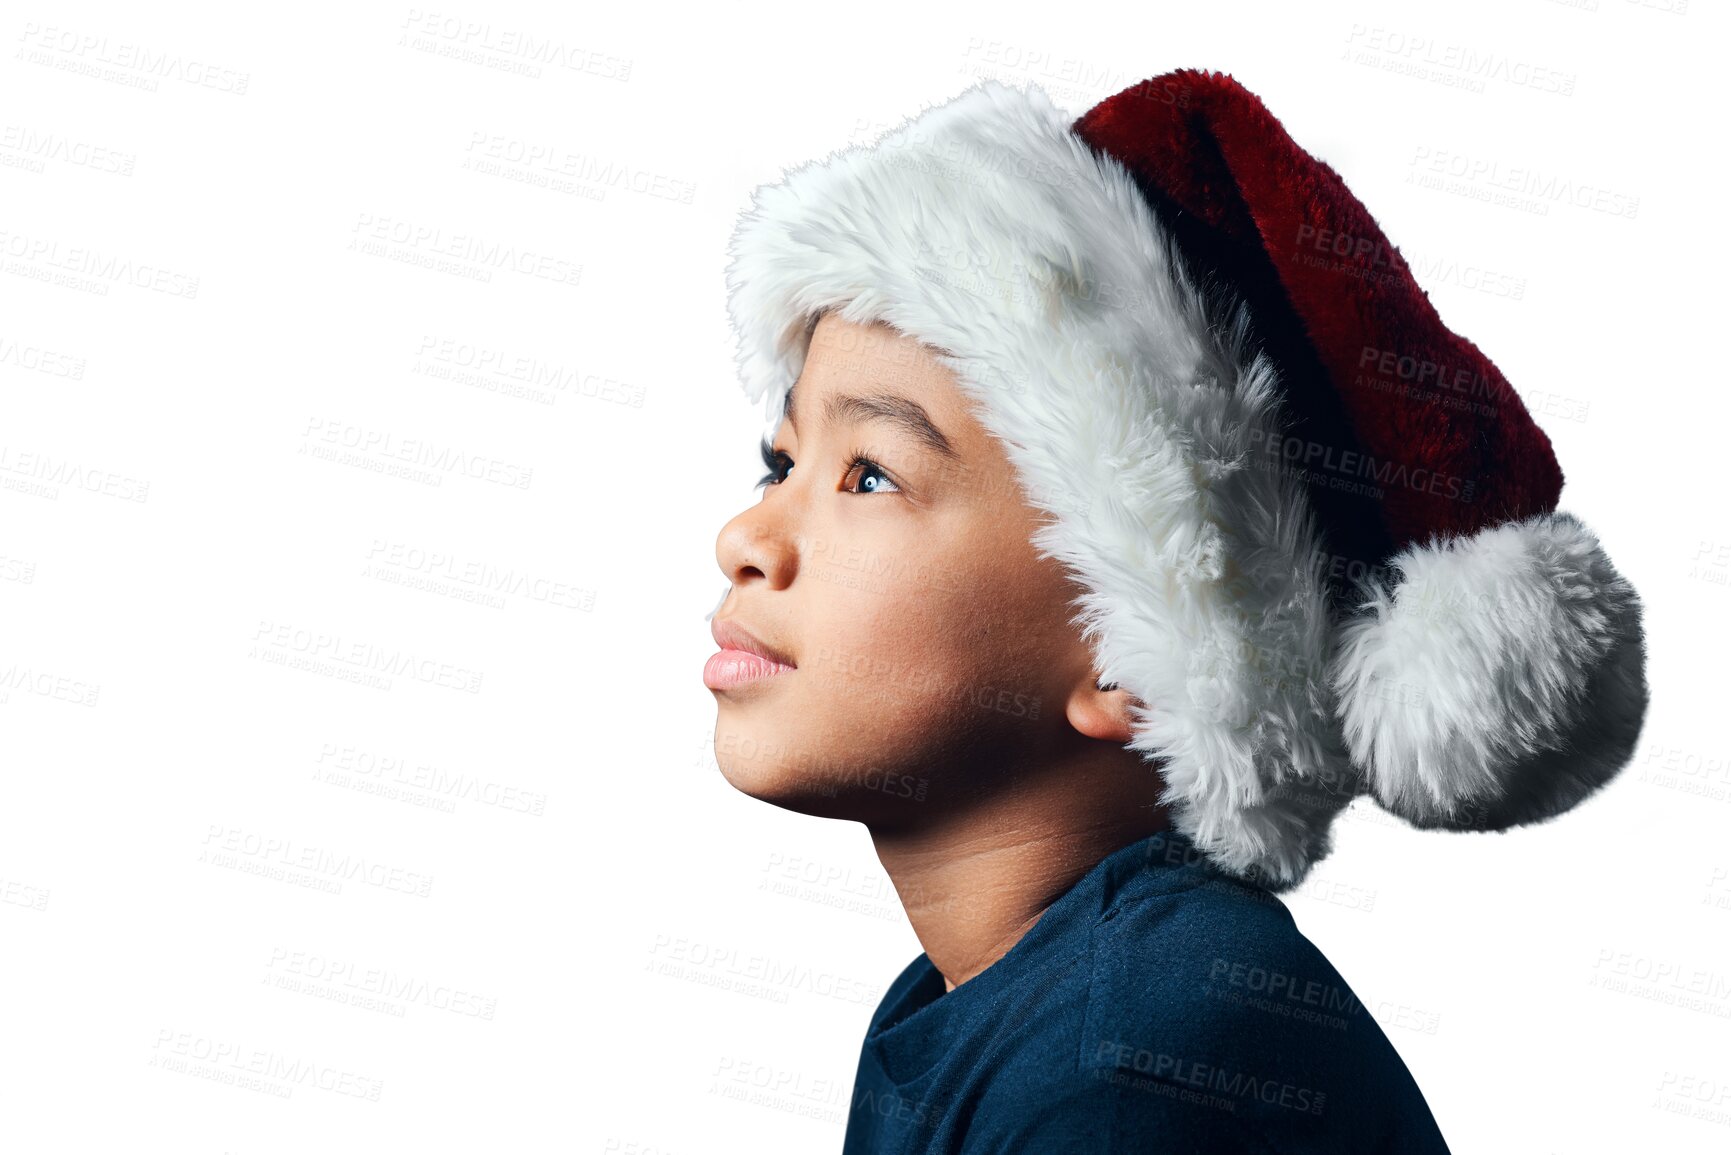 Buy stock photo Isolated boy child, thinking and Christmas for wish, hope or idea for gift by transparent png background. Young male kid, xmas fashion and hat with vision for present, festive event, party or holiday